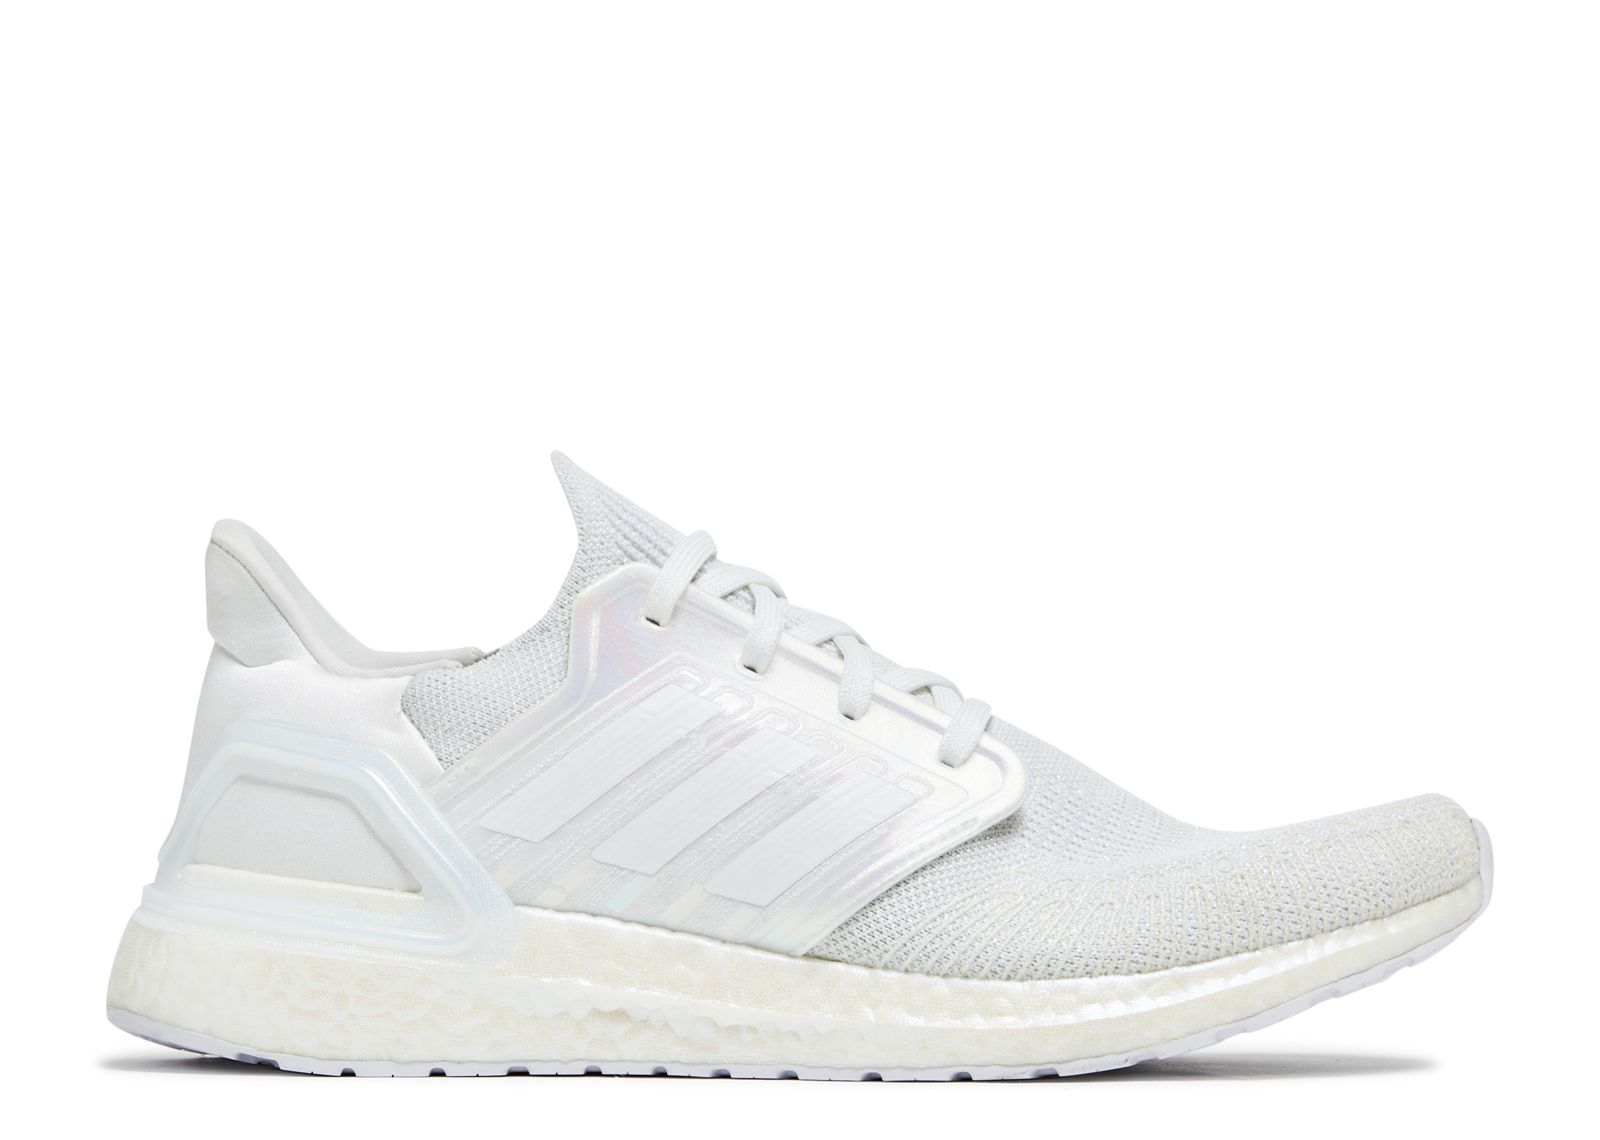 Adidas Ultra Boost 20 Men's Sizes Iridescent White Running Shoes NEW  $180 FW8721